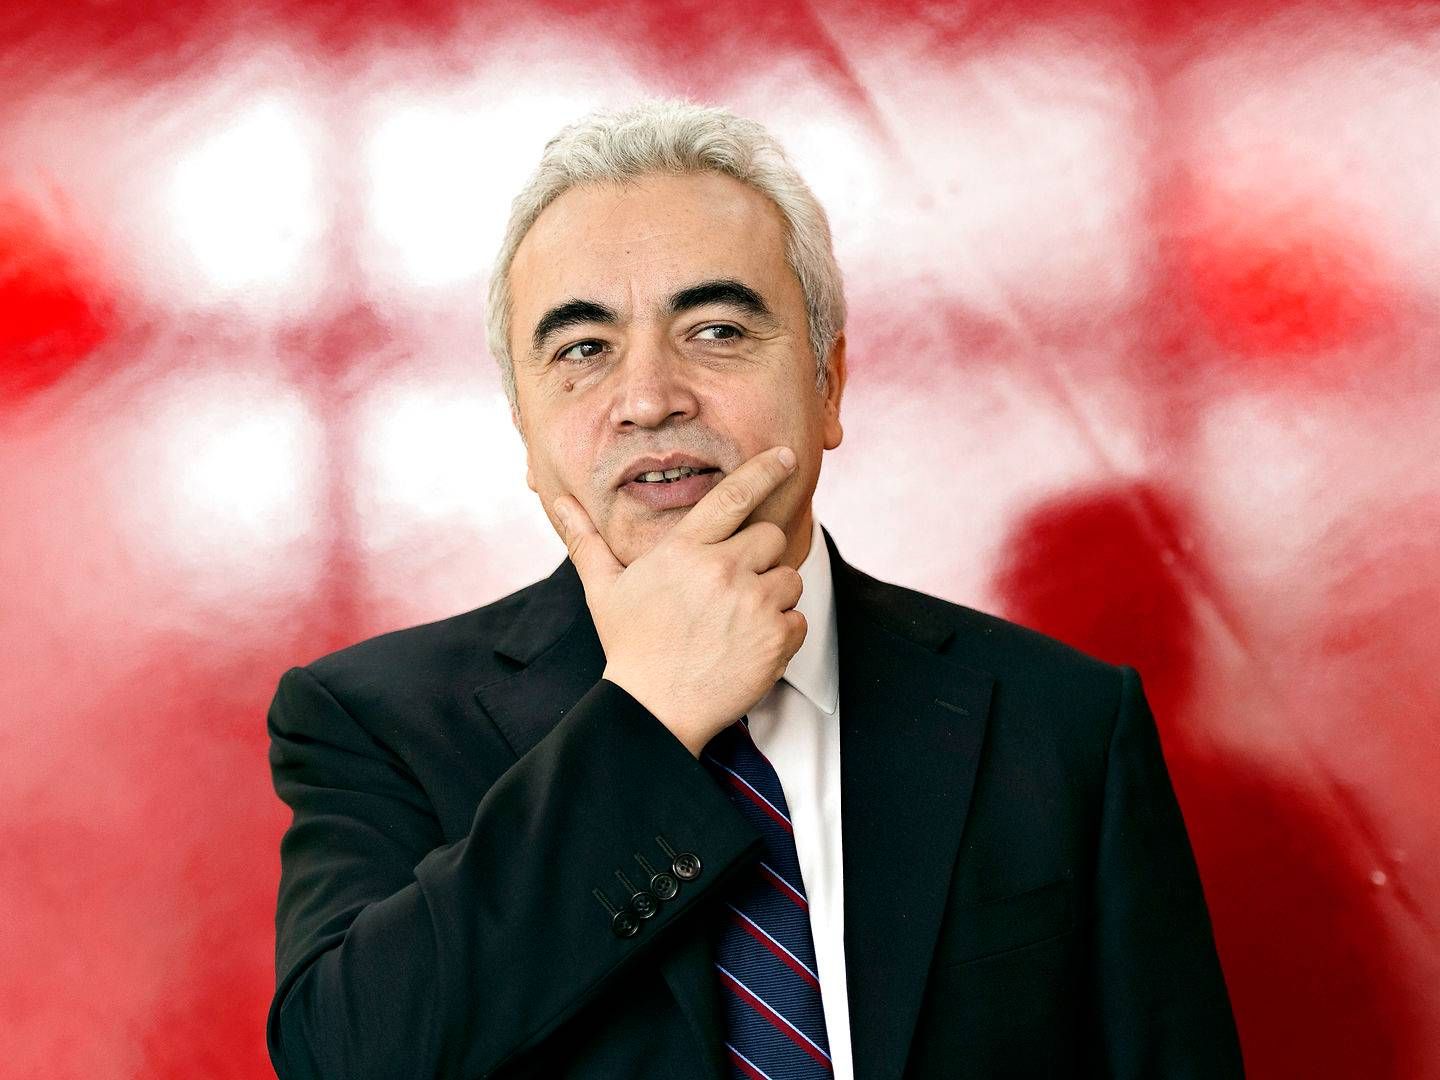 As the sole form of energy, renewables will grow up to 2020, but that's nothing to celebrate, says IEA Executive Director Fatih Birol. | Photo: Lars Krabbe/Jyllands-Posten/Ritzau Scanpix